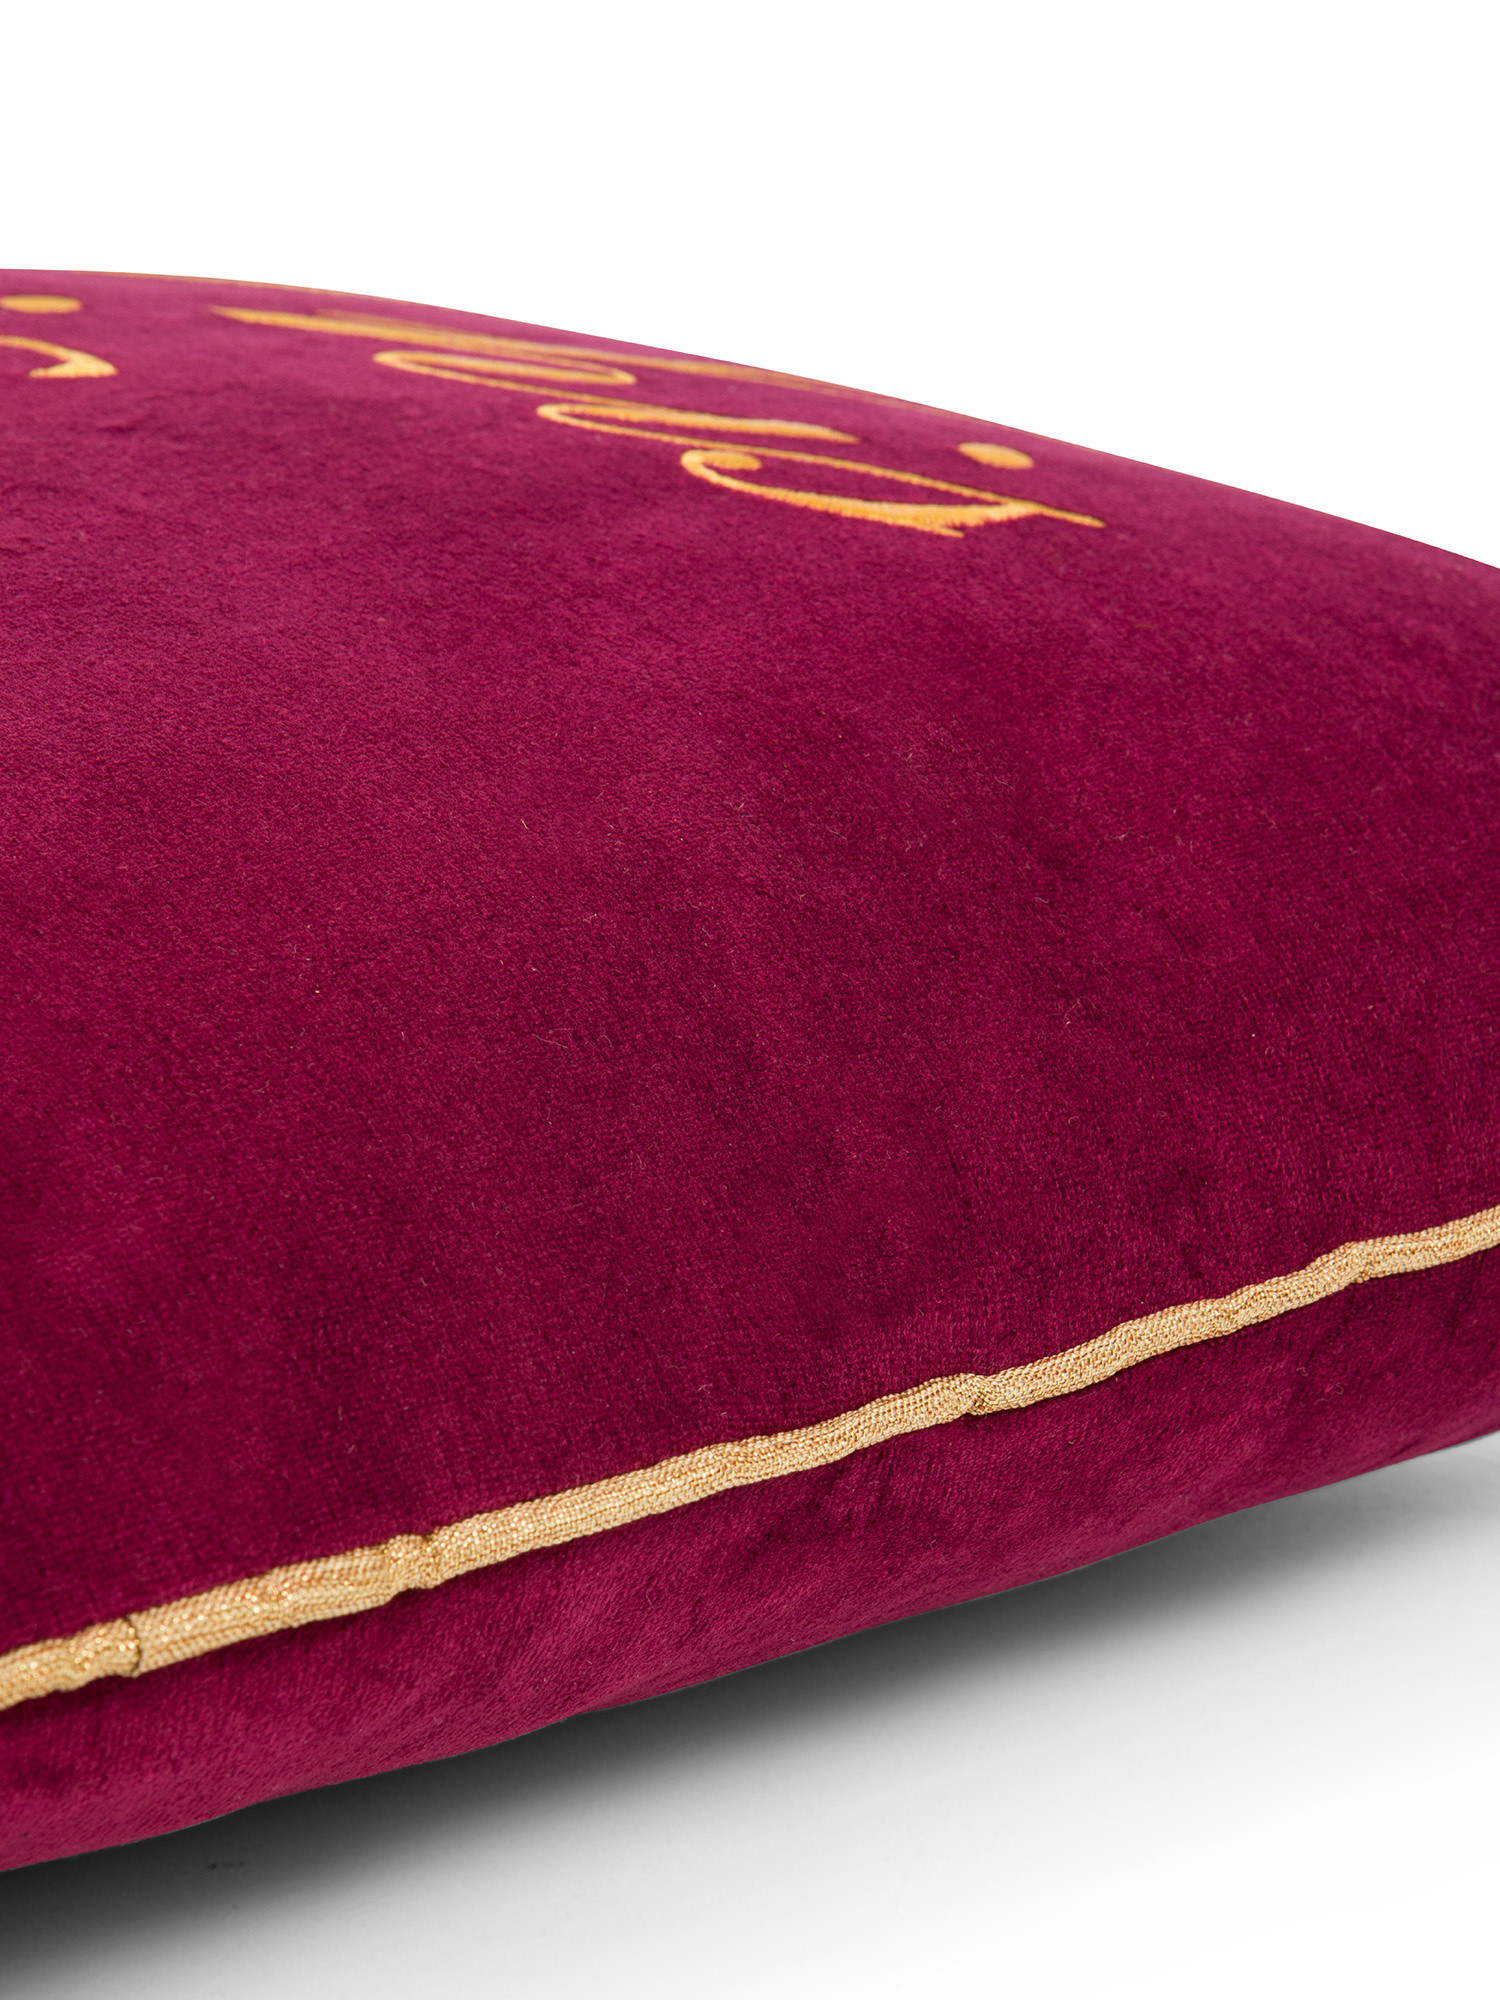 Velvet cushion embroidered with piping 45X45cm, Red Bordeaux, large image number 2